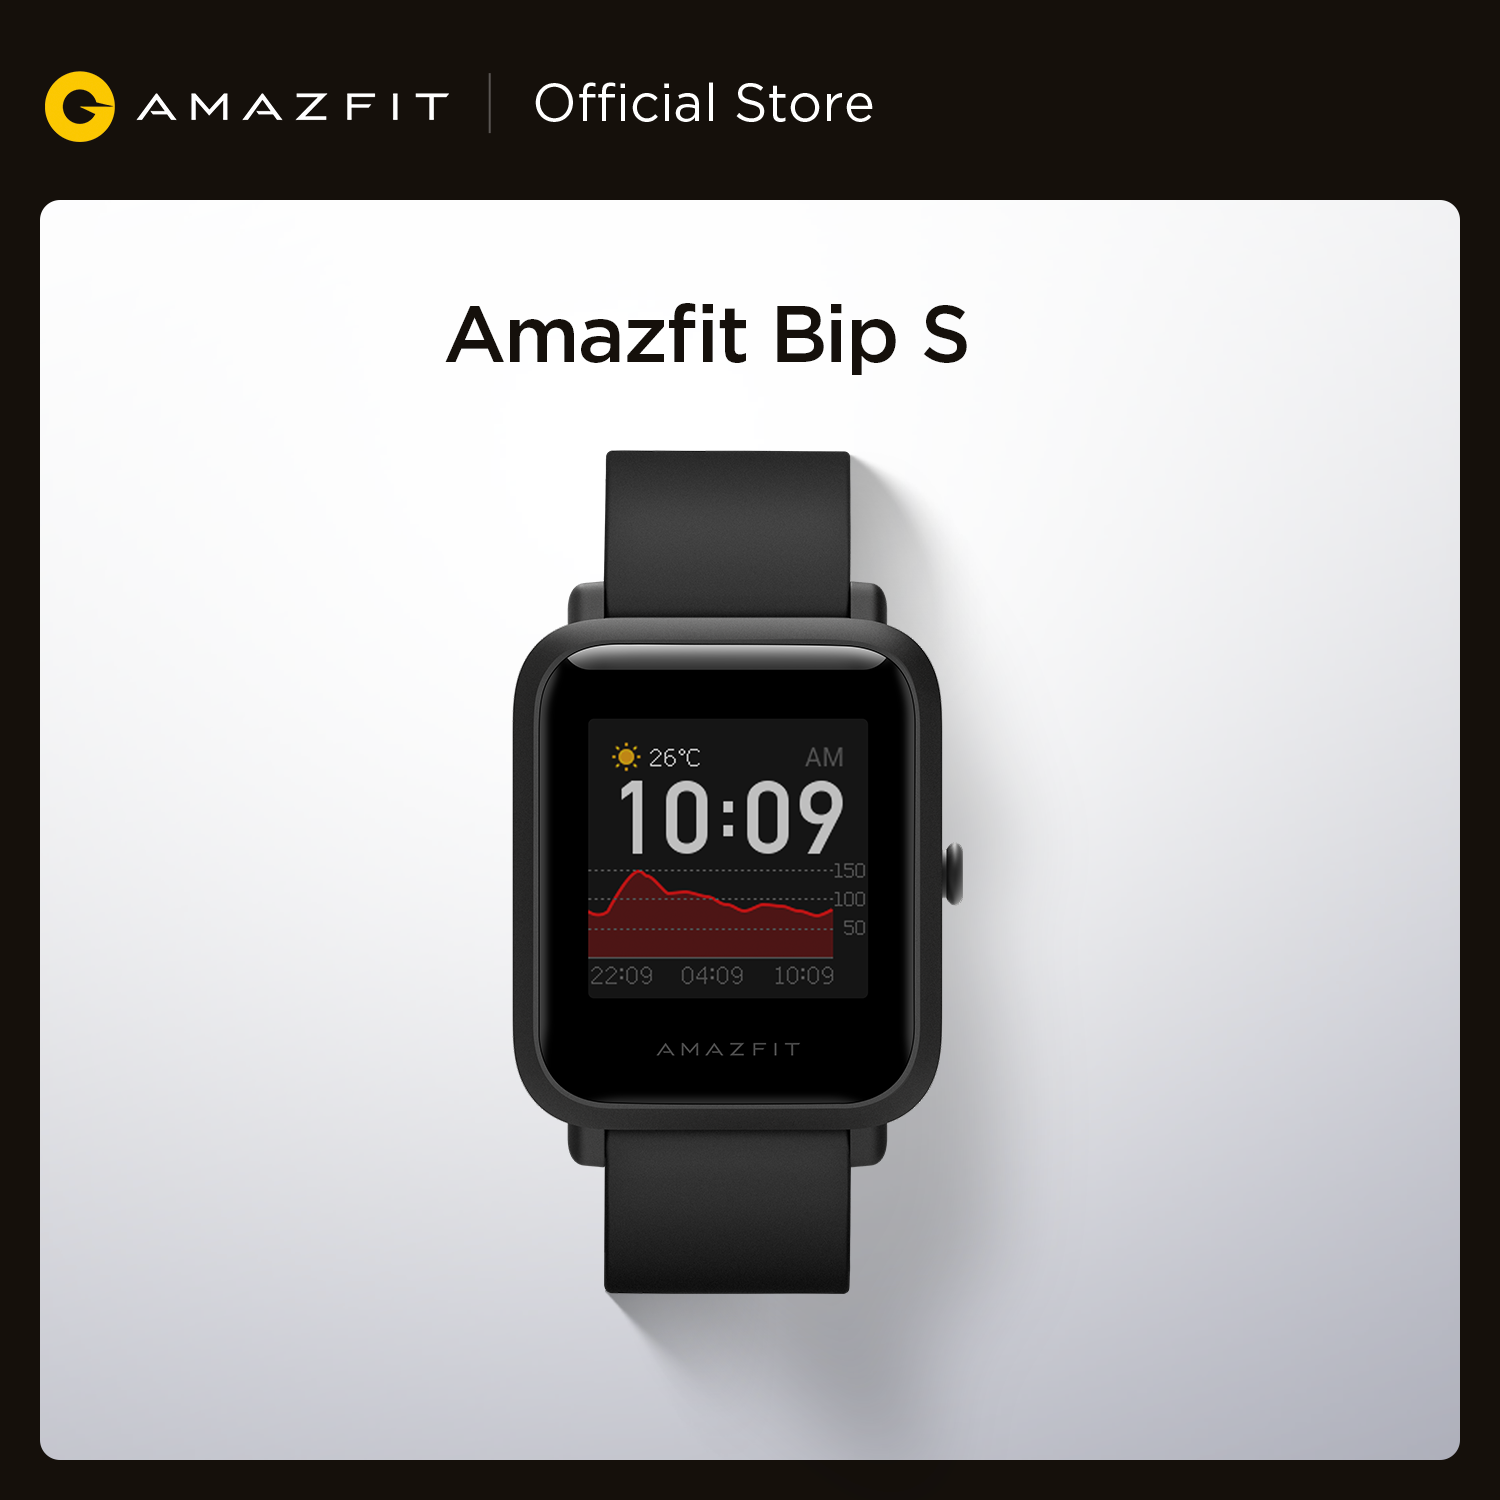 

In Stock 2021 Global Amazfit Bip S Smartwatch 5ATM waterproof built in GPS GLONASS Smart Watch for Android iOS Phoneg, White rock